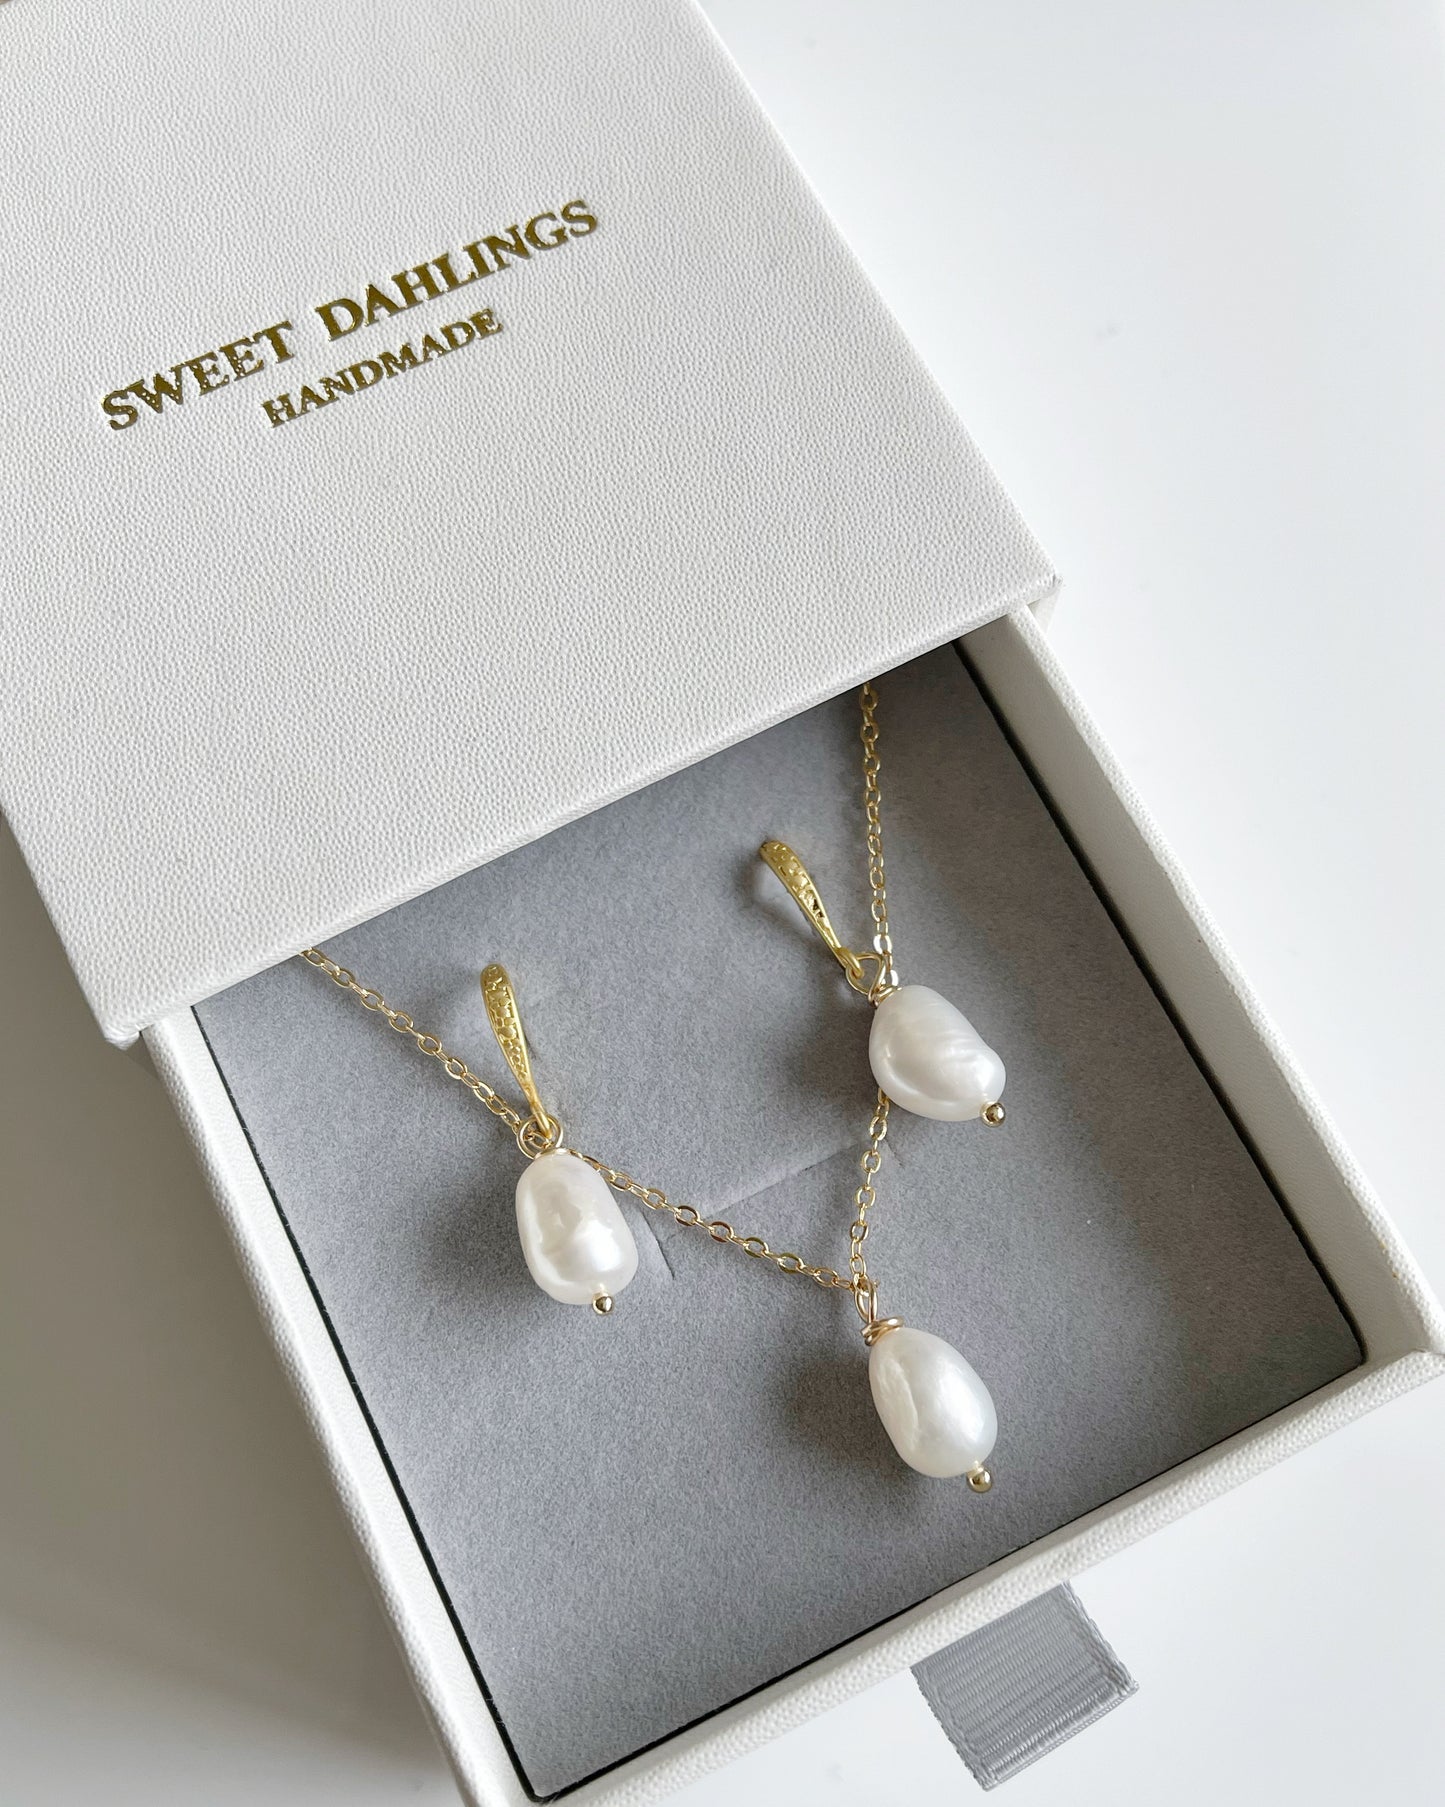 My first baroque pearl necklace and earring set in white